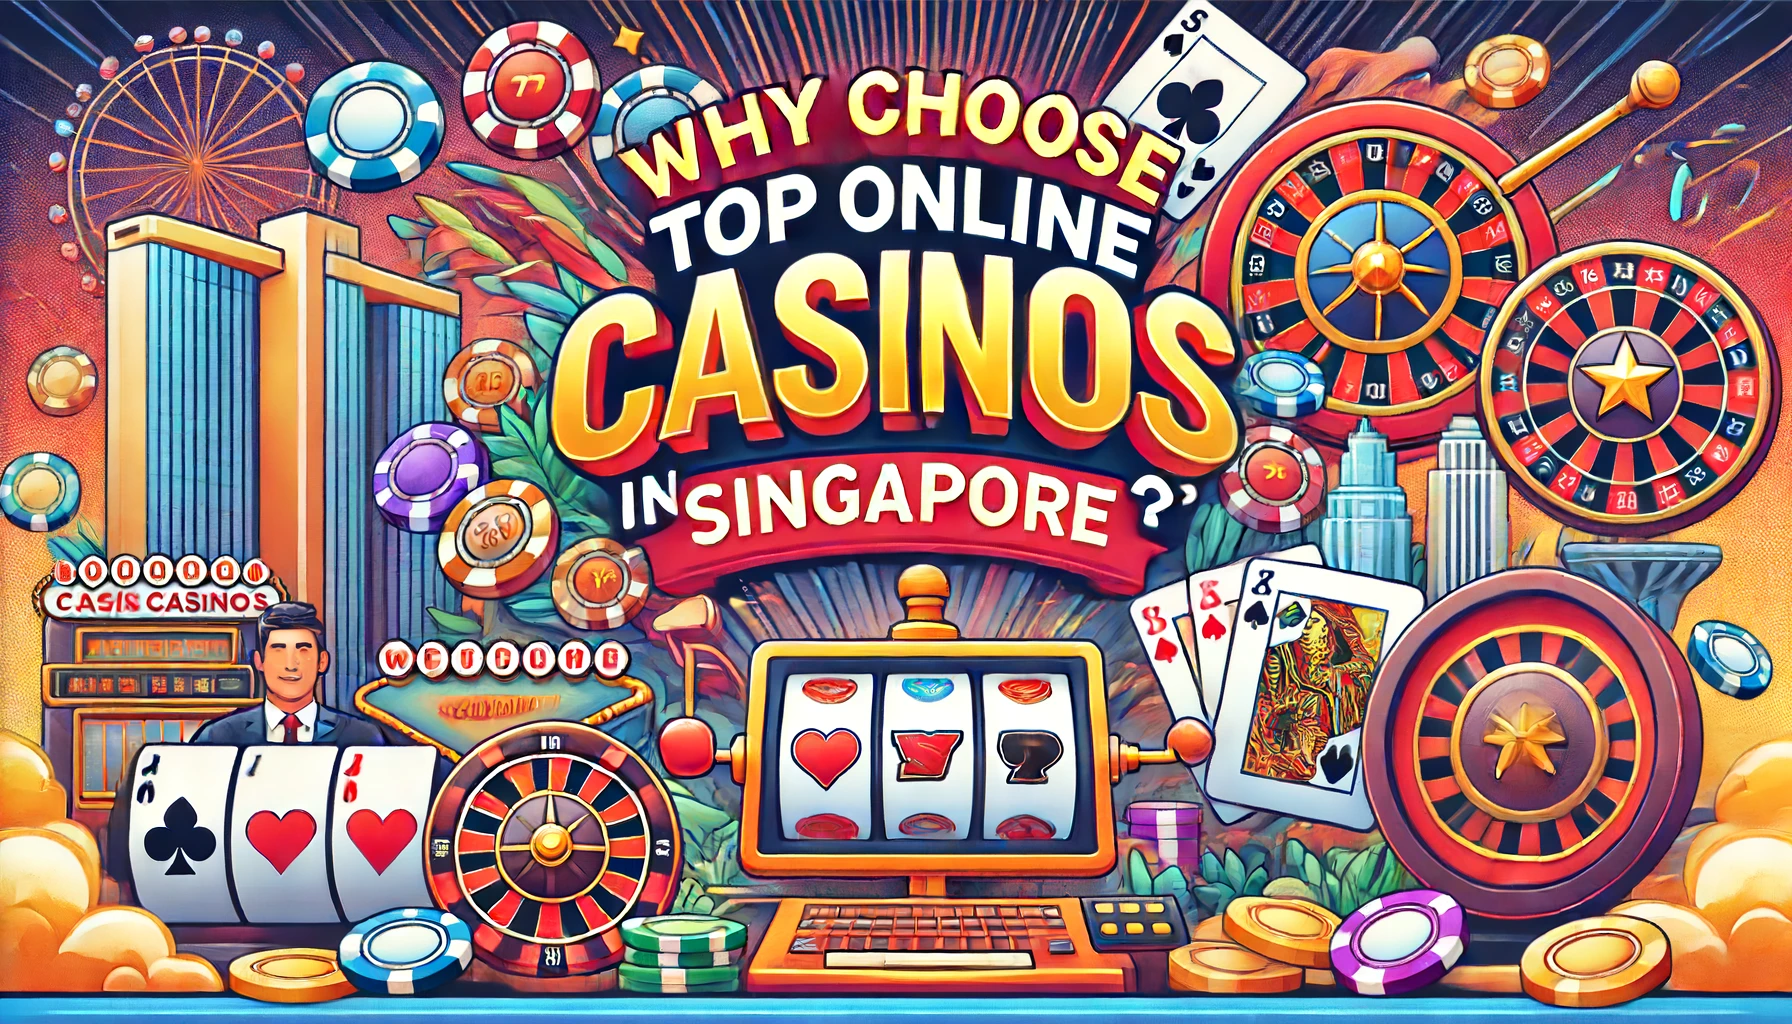 Top Online Casino Singapore: Play & Win Big with Trusted Sites